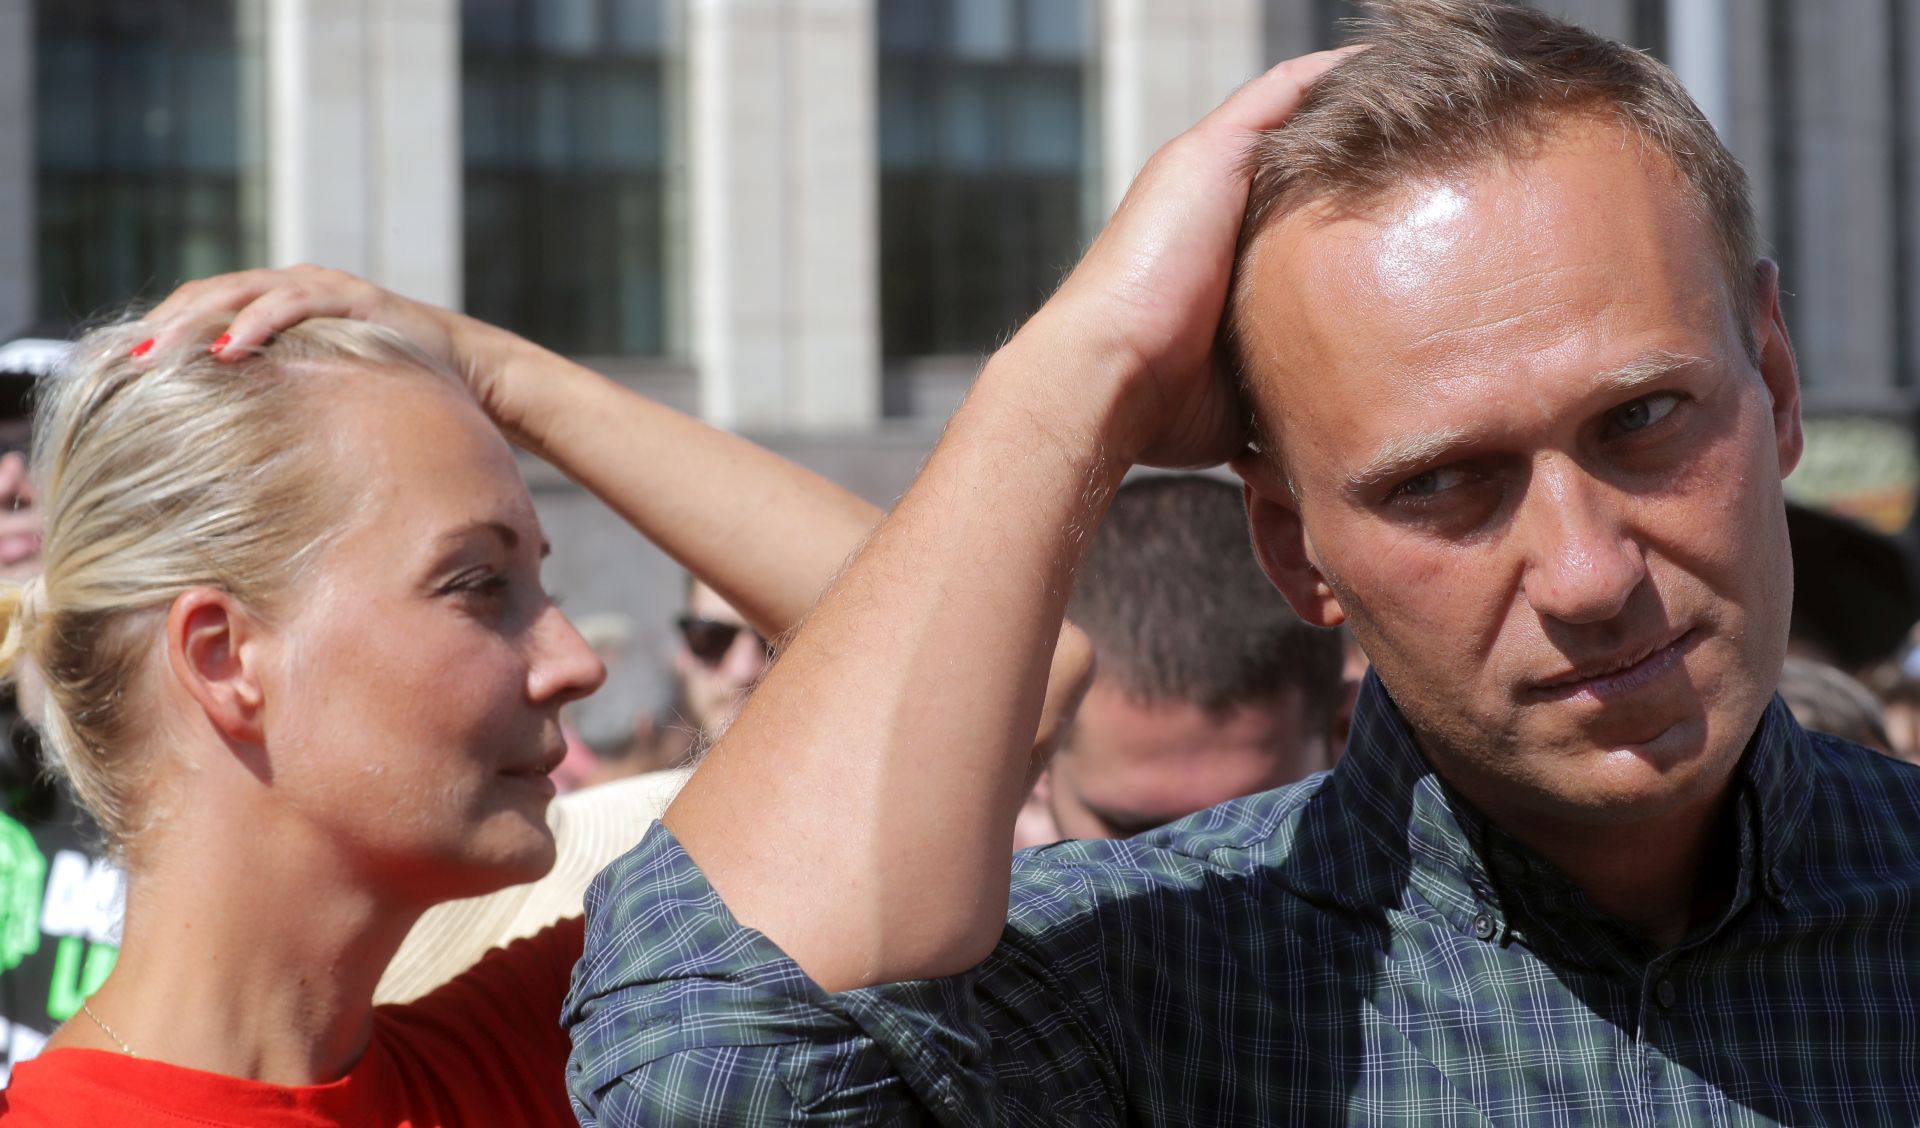 epa08613913 (FILE) - Russian liberal opposition leader and a head of an anti-corruption foundation, Alexei Navalny and his wife Yulia attend a rally against pension age increase in Moscow, Russia, 29 July 2018 (reissued 20 August 2020). Navalny's spokeswoman Kira Yarmysh said on social media on 20 August that the opposition leader and critic of President Vladimir Putin was taken to hospital for alleged poisoning after he started feeling unwell during a flight from Siberia to Moscow. The plane made an emergency landing in the city of Omsk.  EPA/MAXIM SHIPENKOV